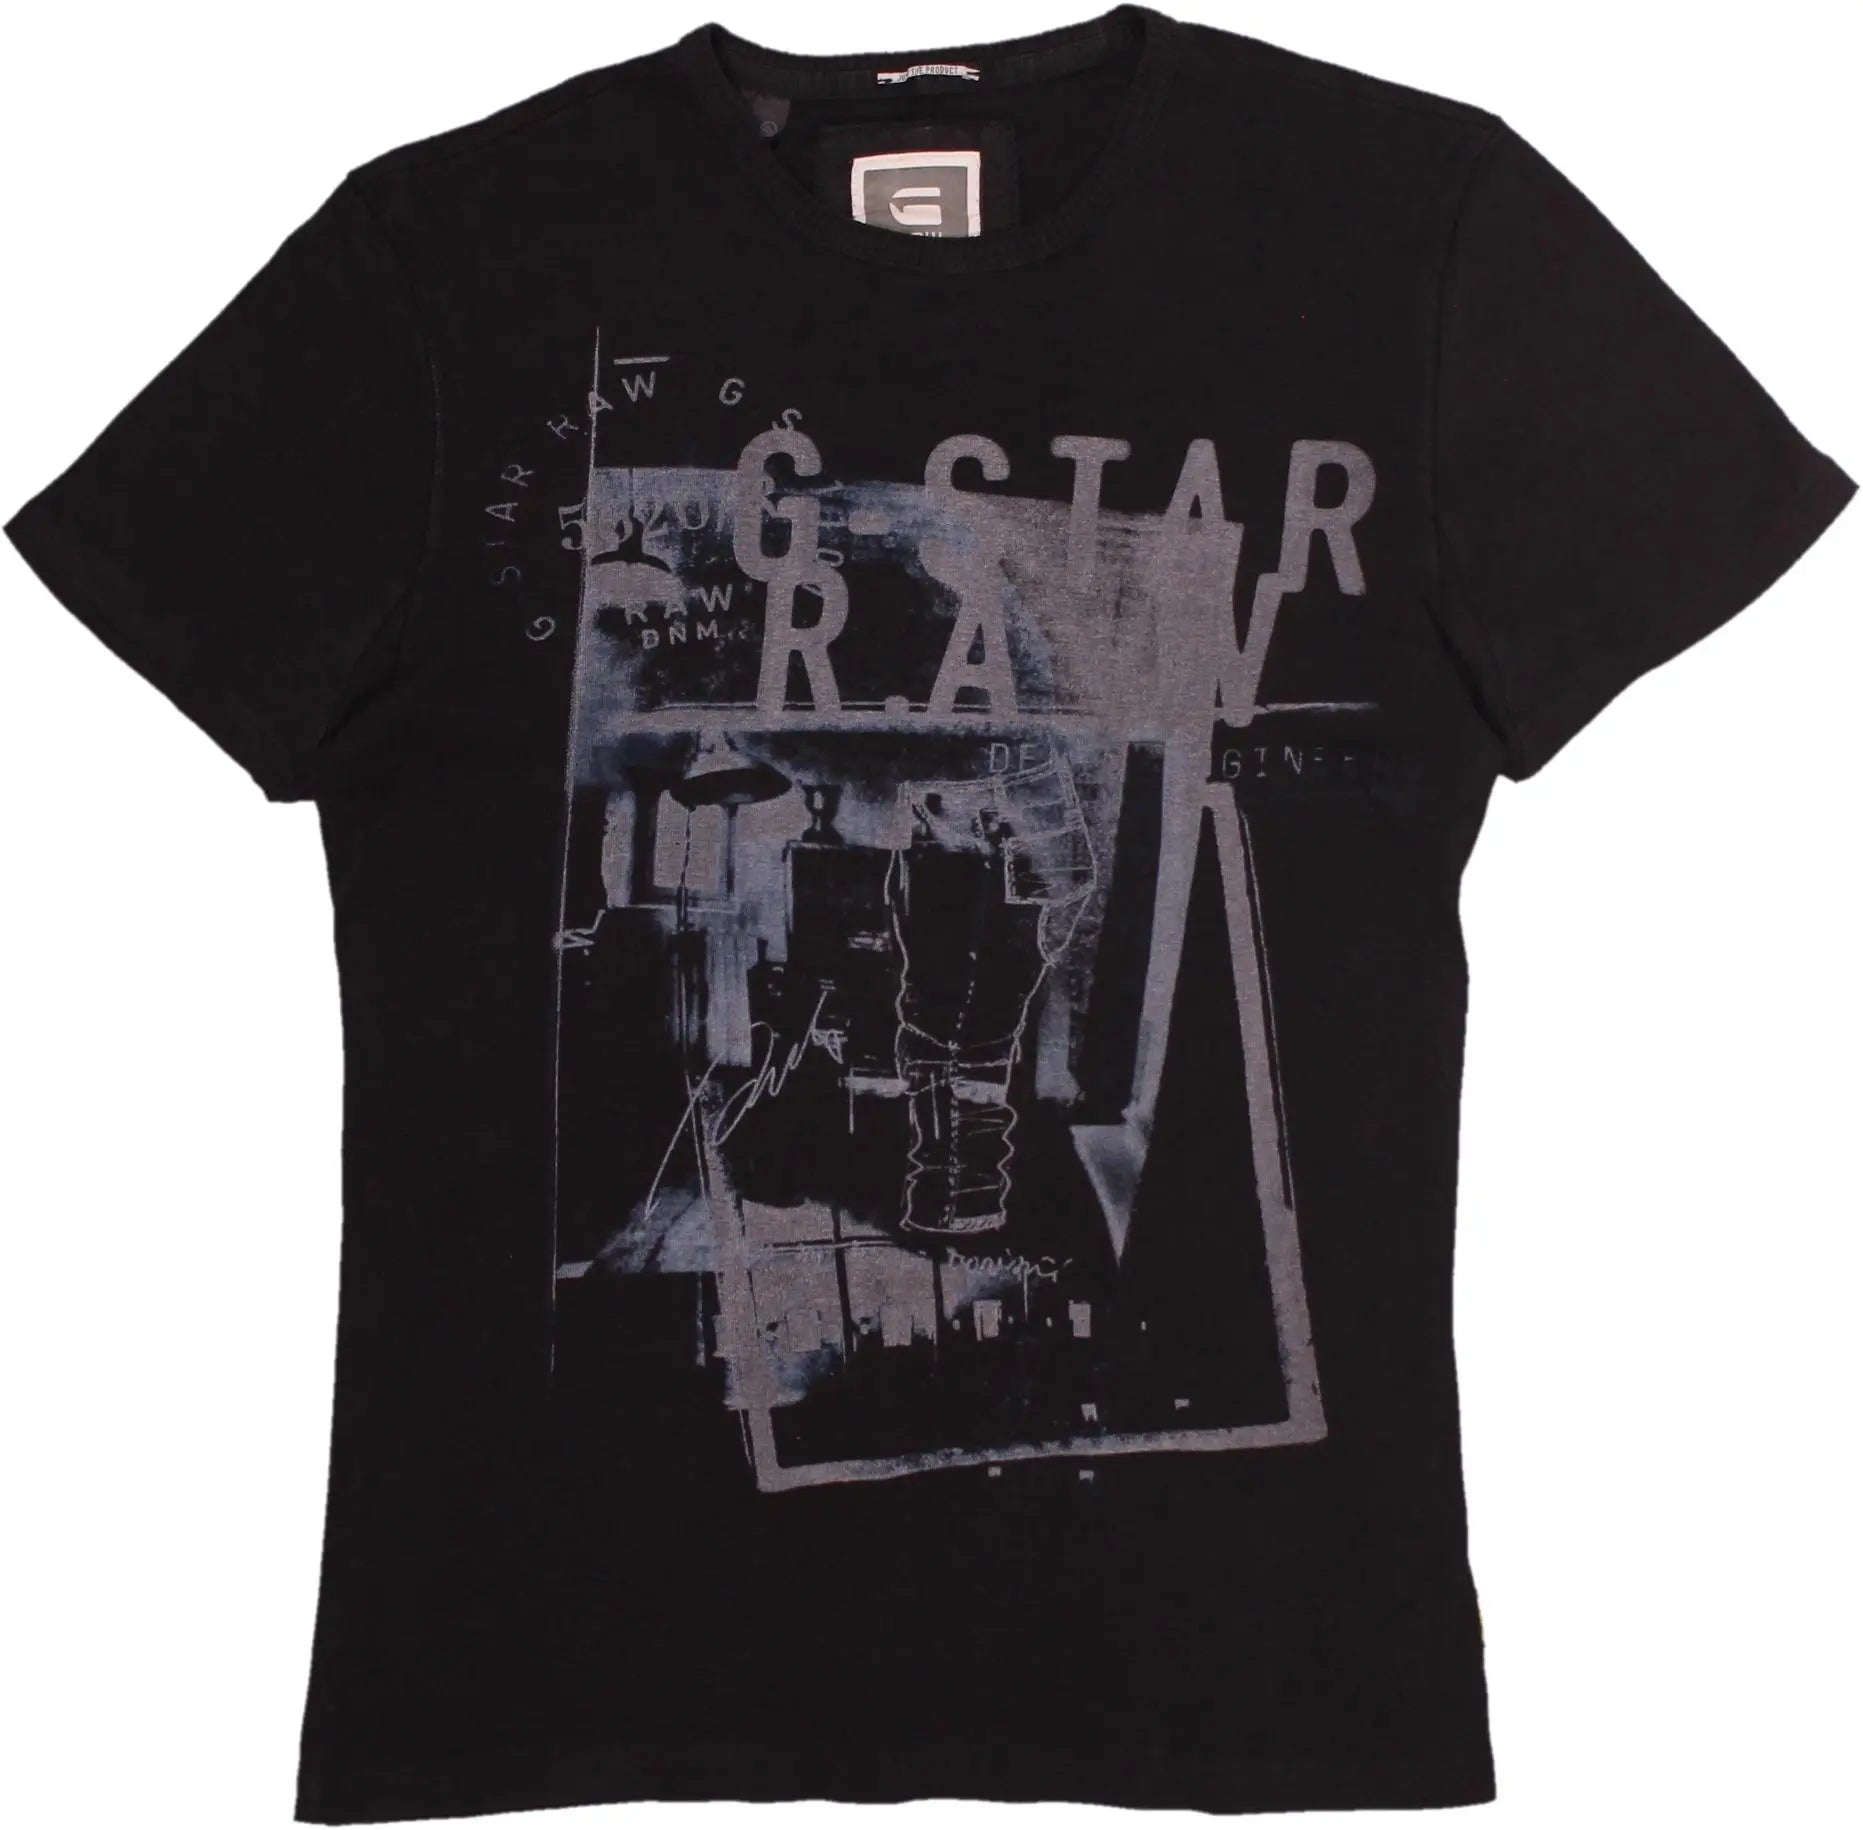 Pre-owned and RAW G-Star vintage